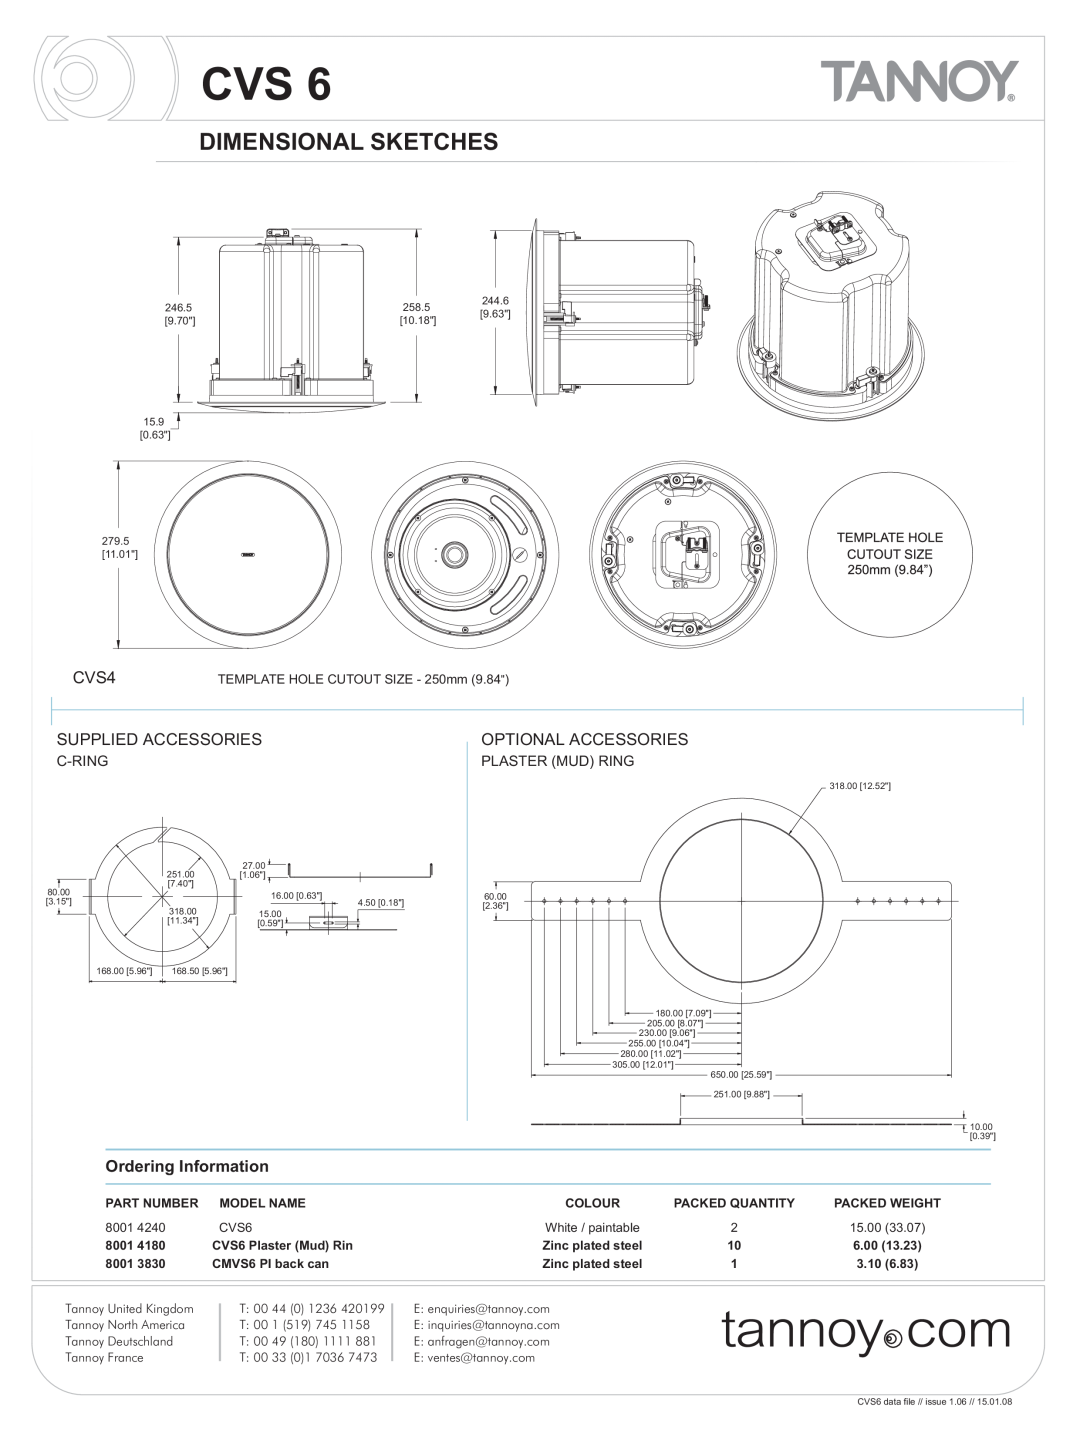 Tannoy CVS6 manual Dimensional Sketches, C-Ring, Plaster Mud Ring, CVS4, Supplied Accessories, Optional Accessories 